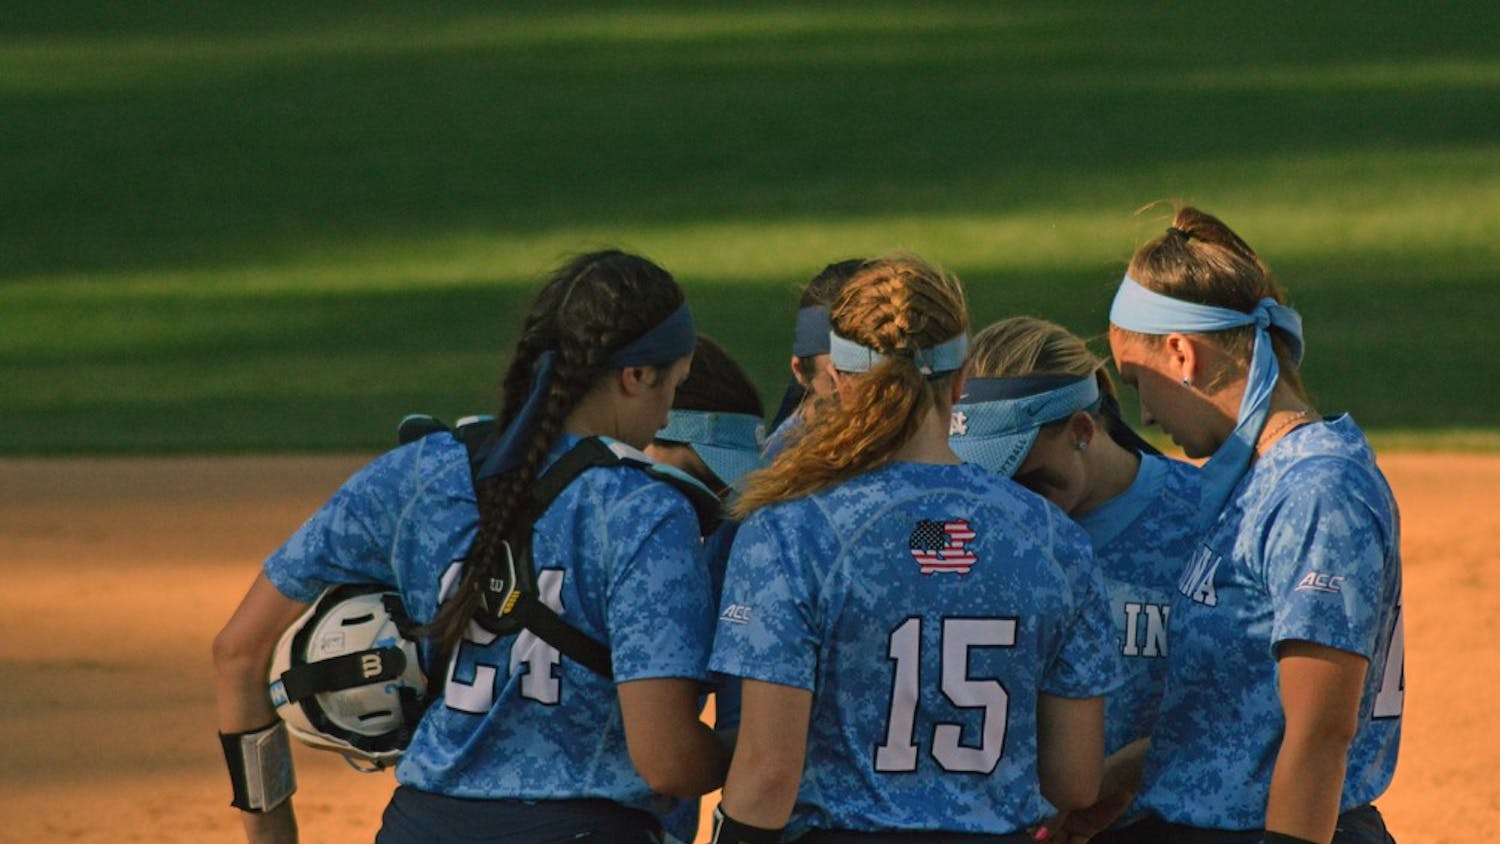 The UNC softball team huddled together to discuss their plays during their game against Louisville Saturday.